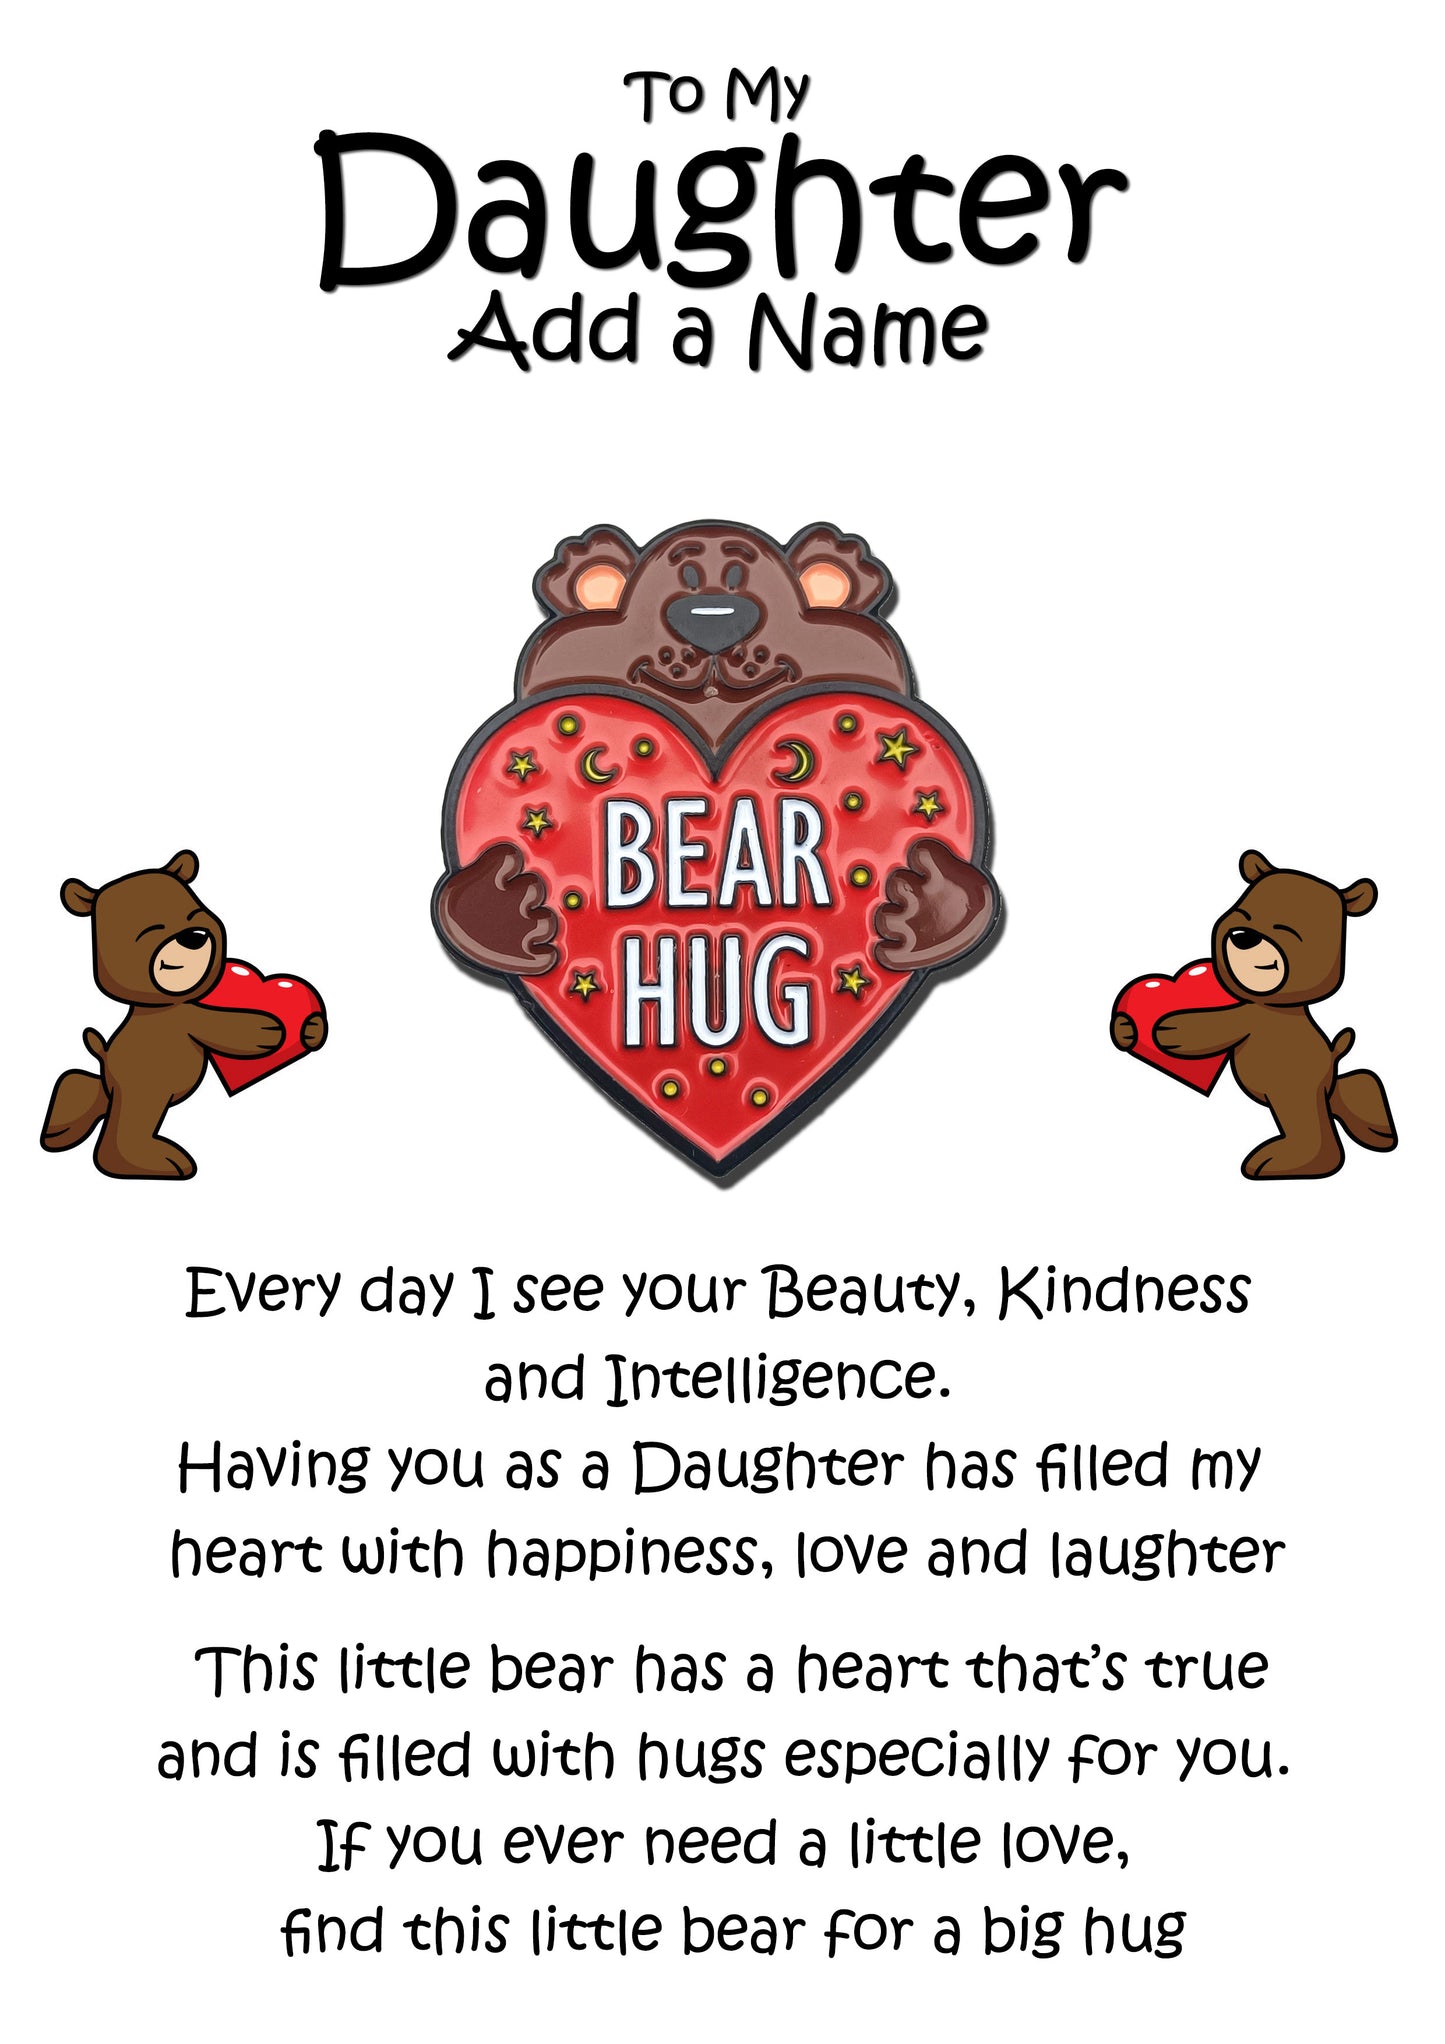 Bear Hug Red Heart Pin Badges & Personalised Daughter Message Cards